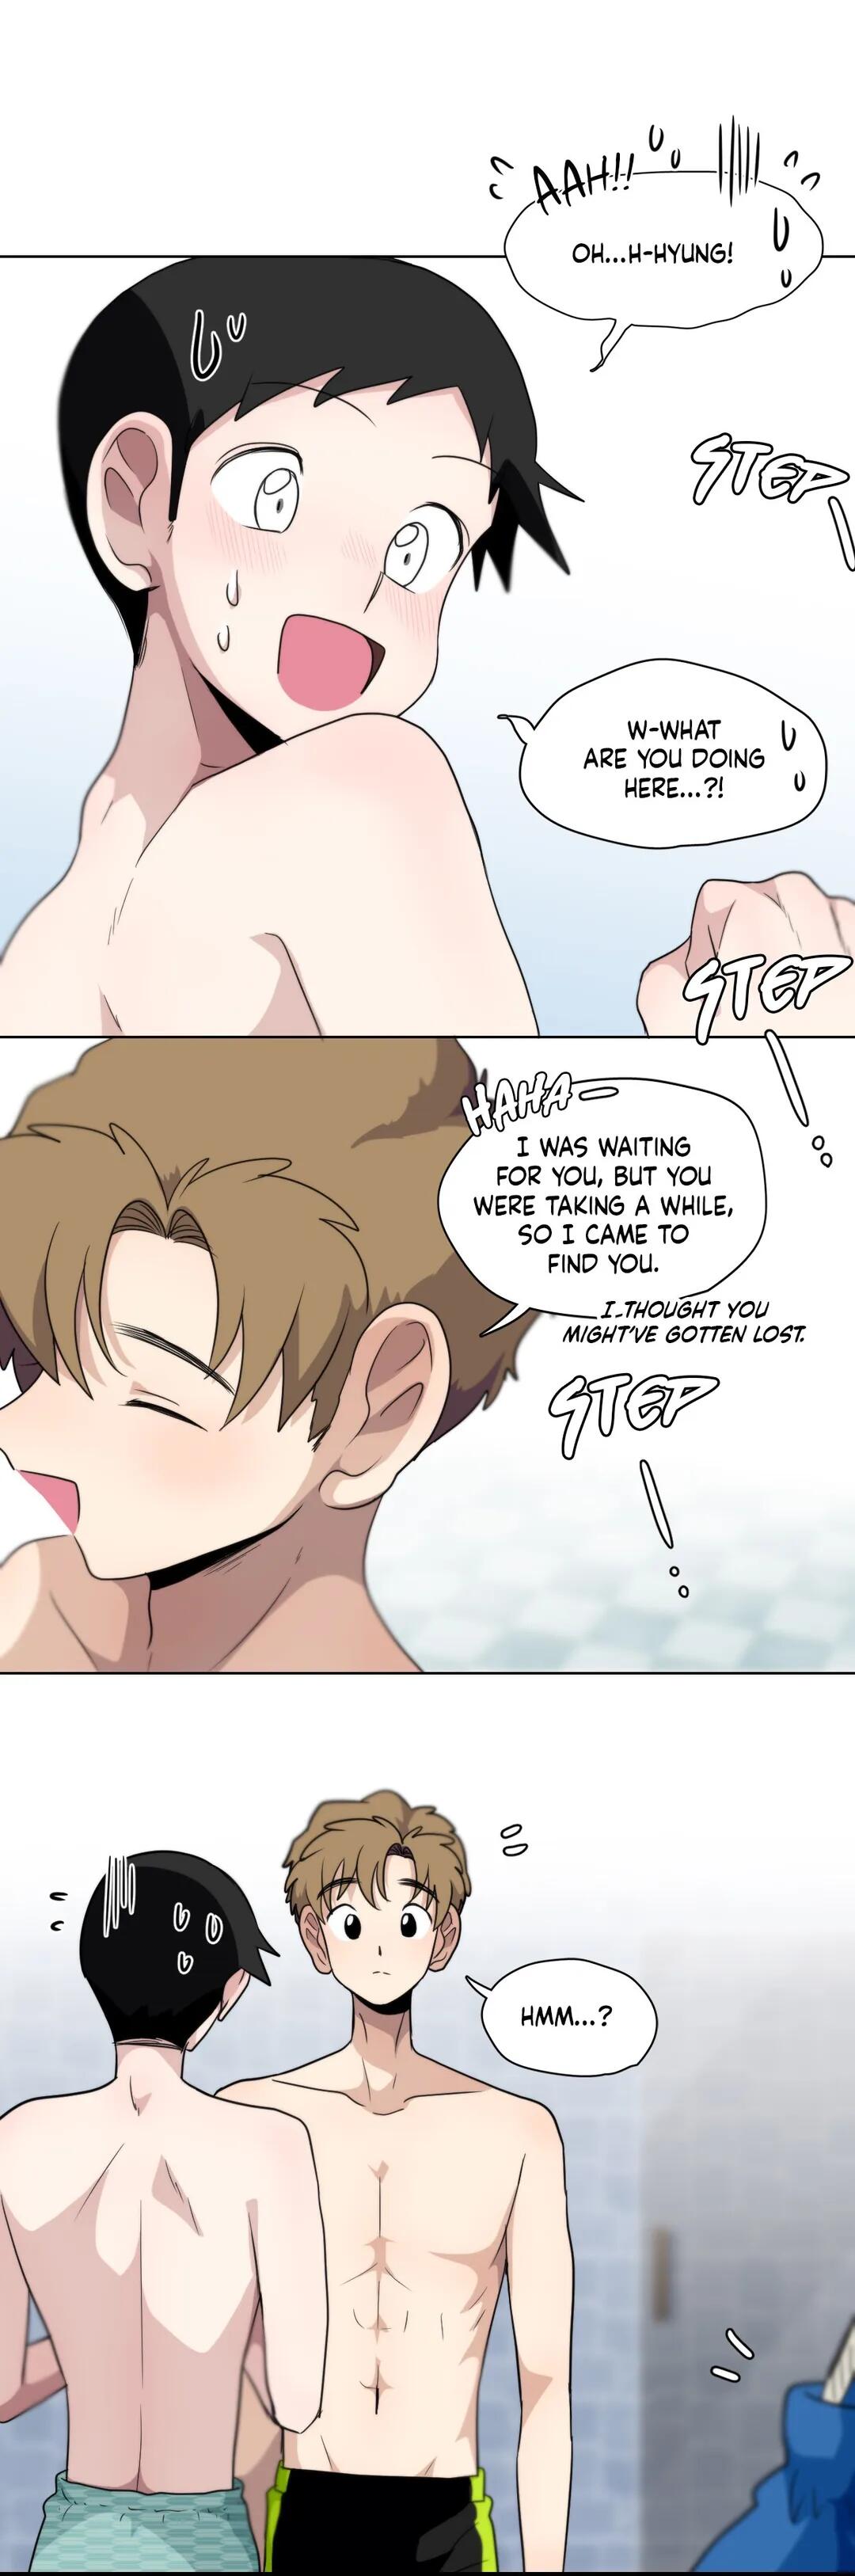 Star x Fanboy - chapter 136 - #1